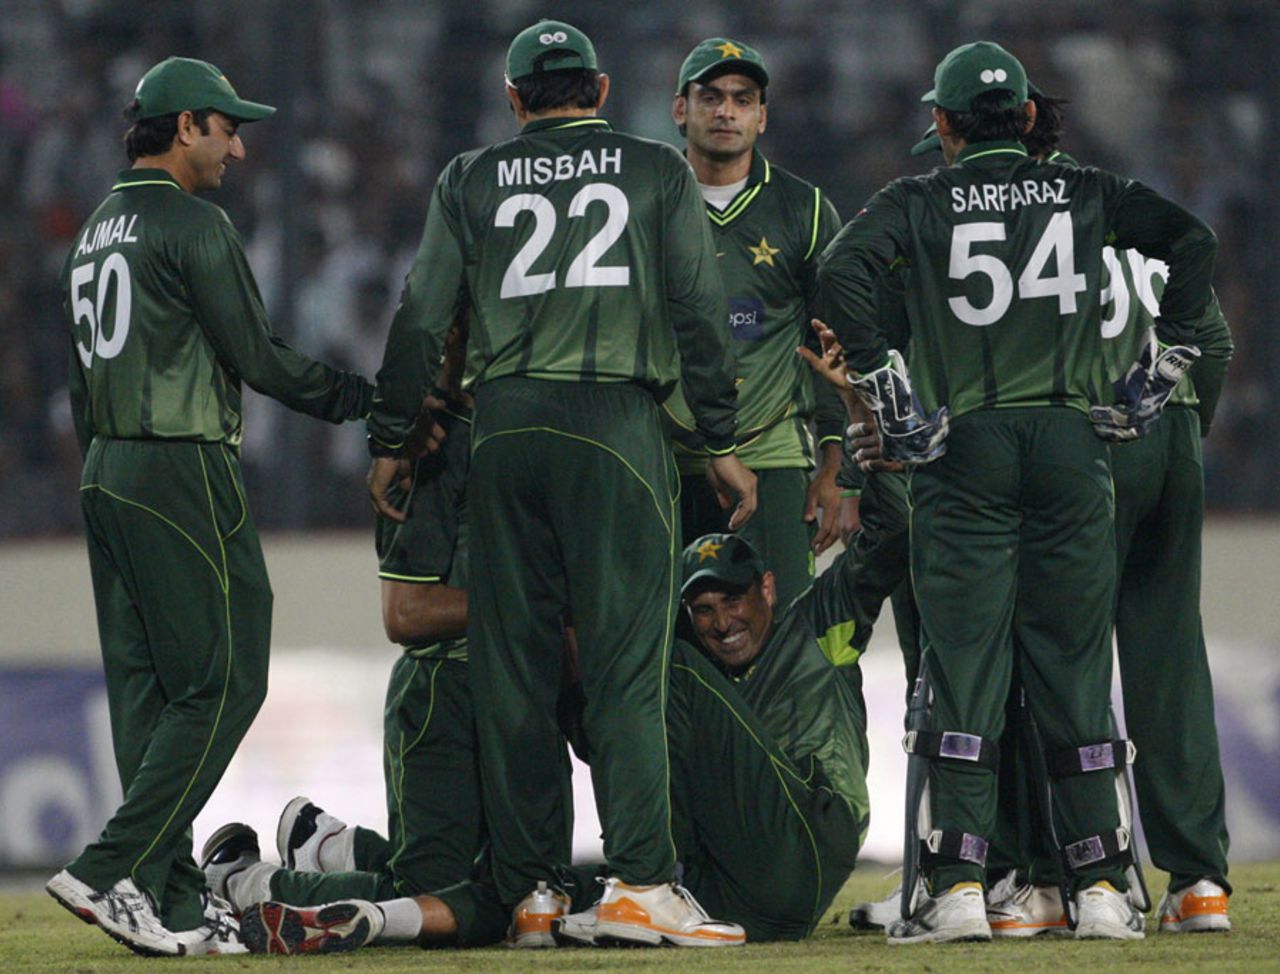 Younis Khan is congratulated on taking a catch, Bangladesh v Pakistan, 2nd ODI, Mirpur, December 3, 2011